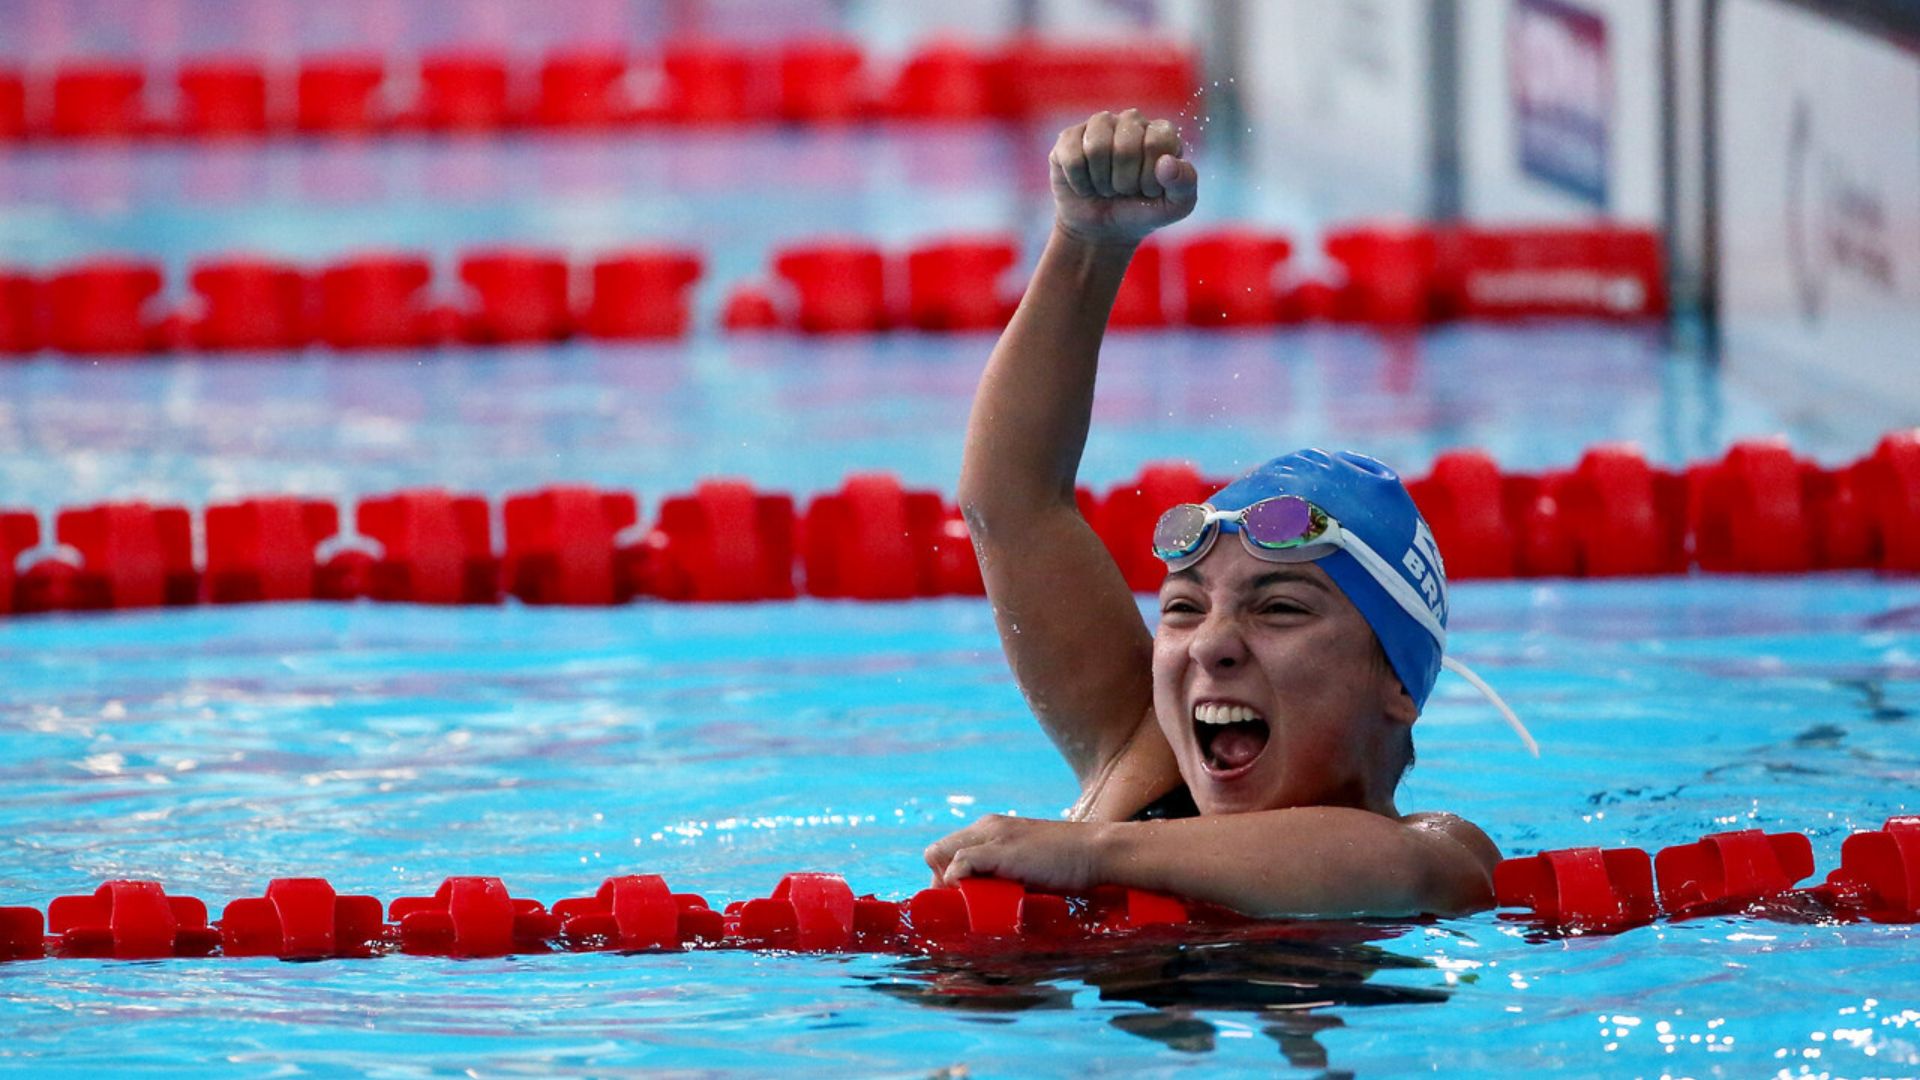 Para Swimming: The Brazilian Laila Suzigan Secures Her Fourth Gold